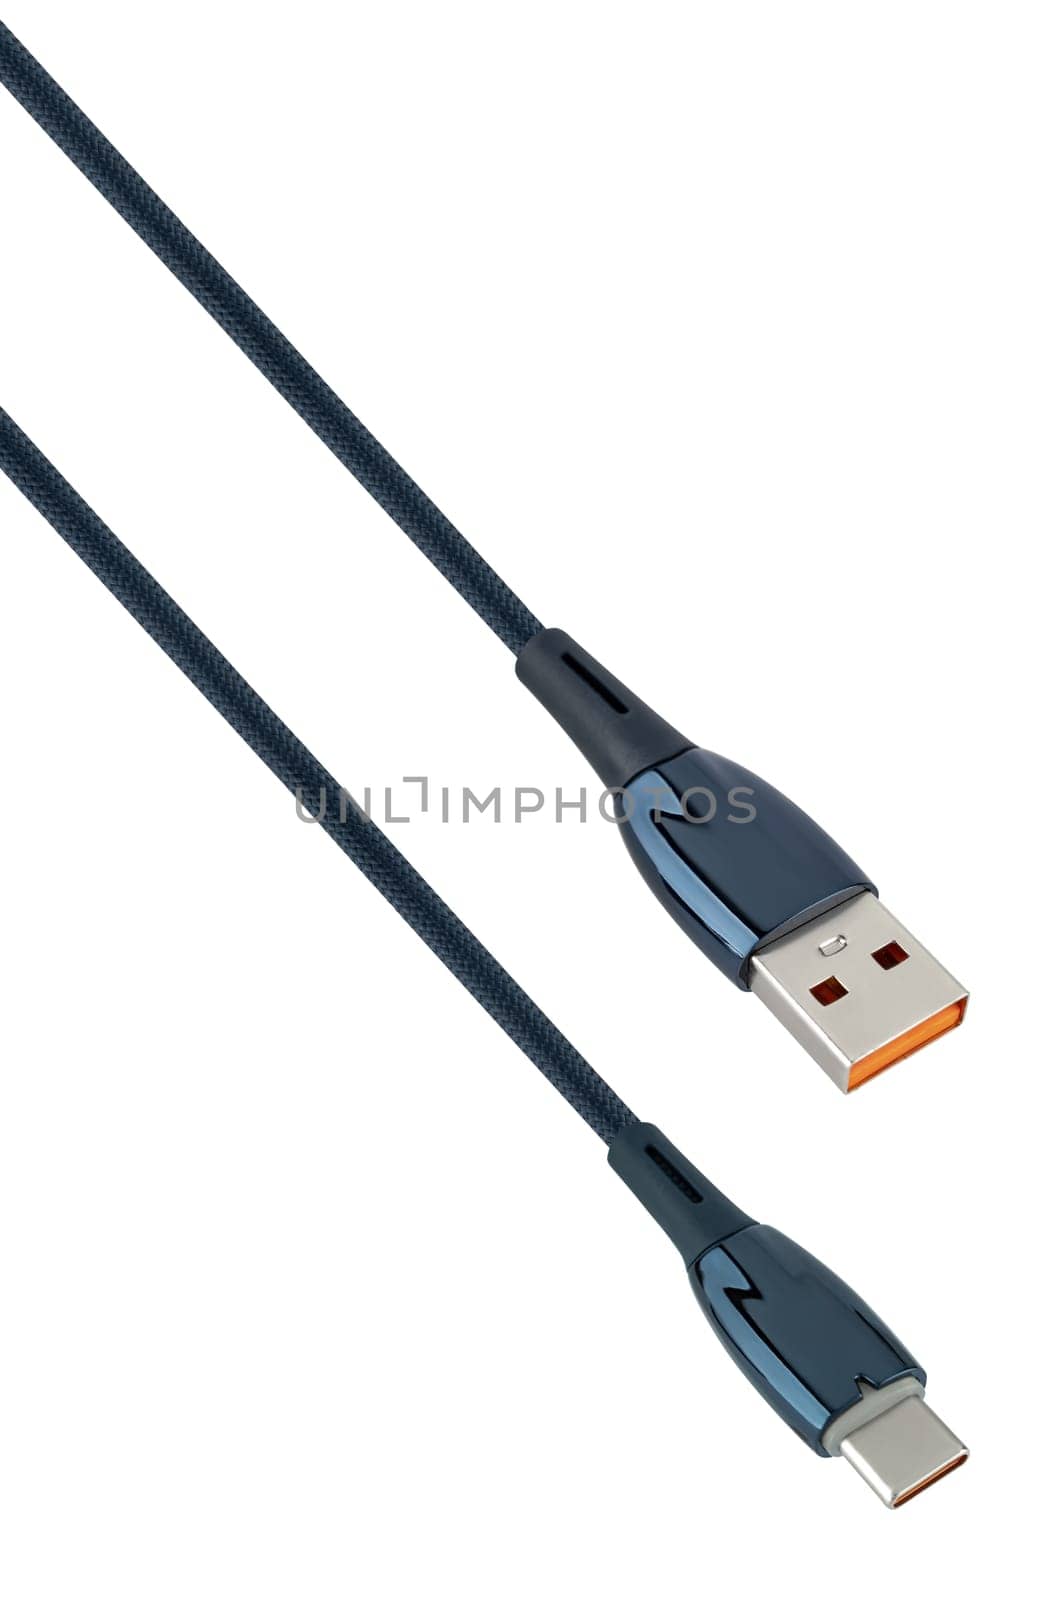 USB and Type-C cable on white background in insulation